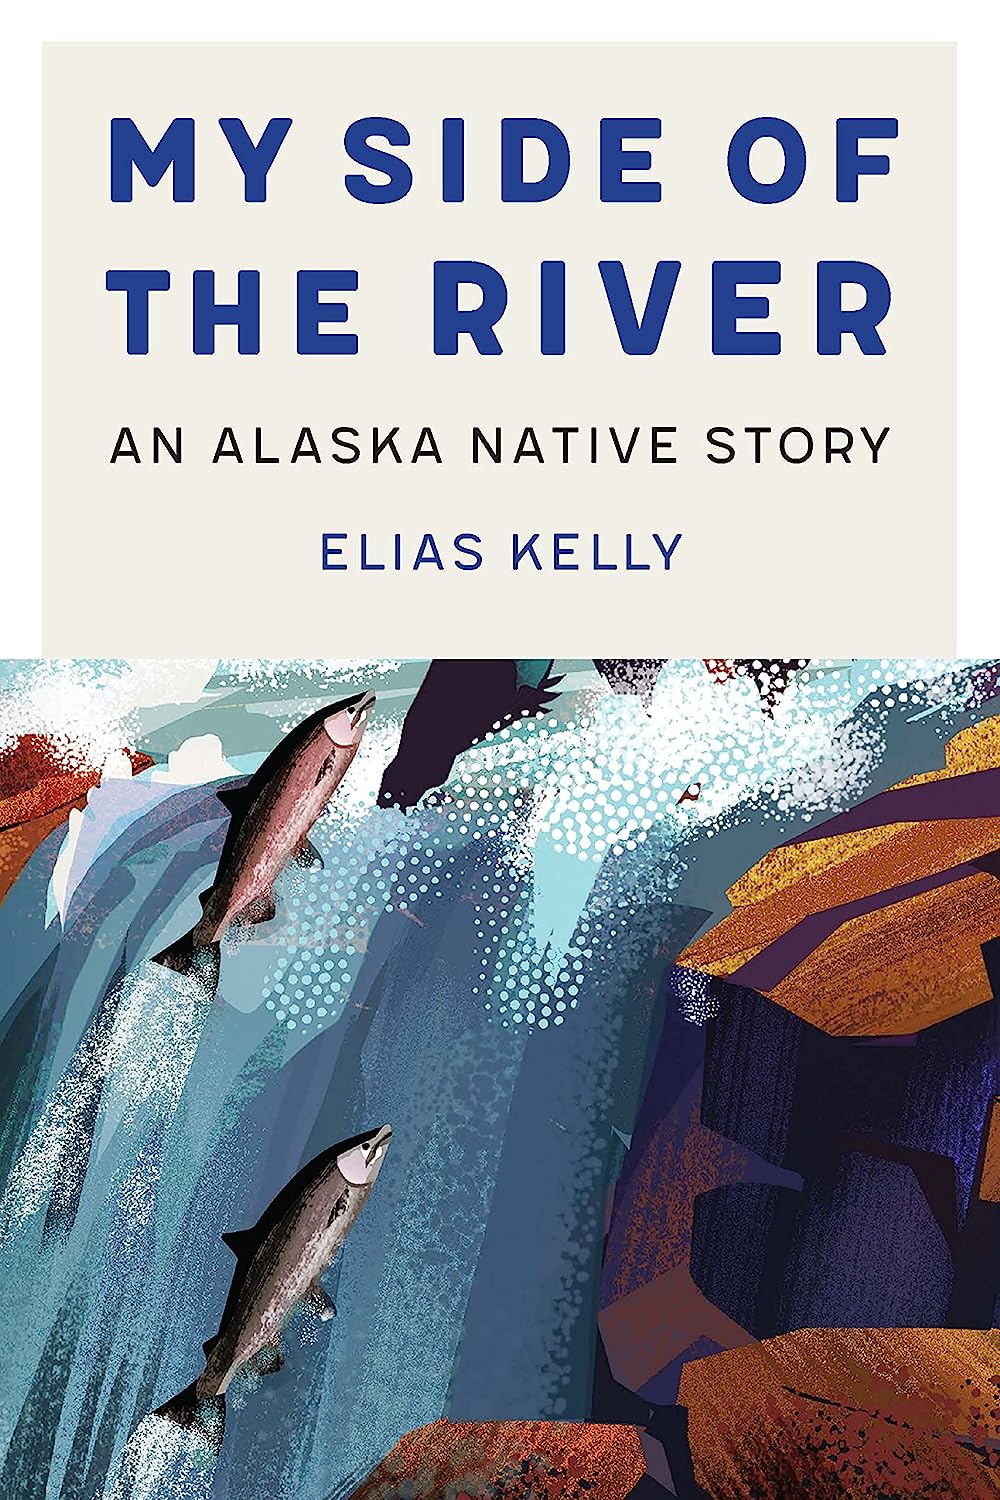 My Side of the River: An Alaska Native Story by Elias Kelly